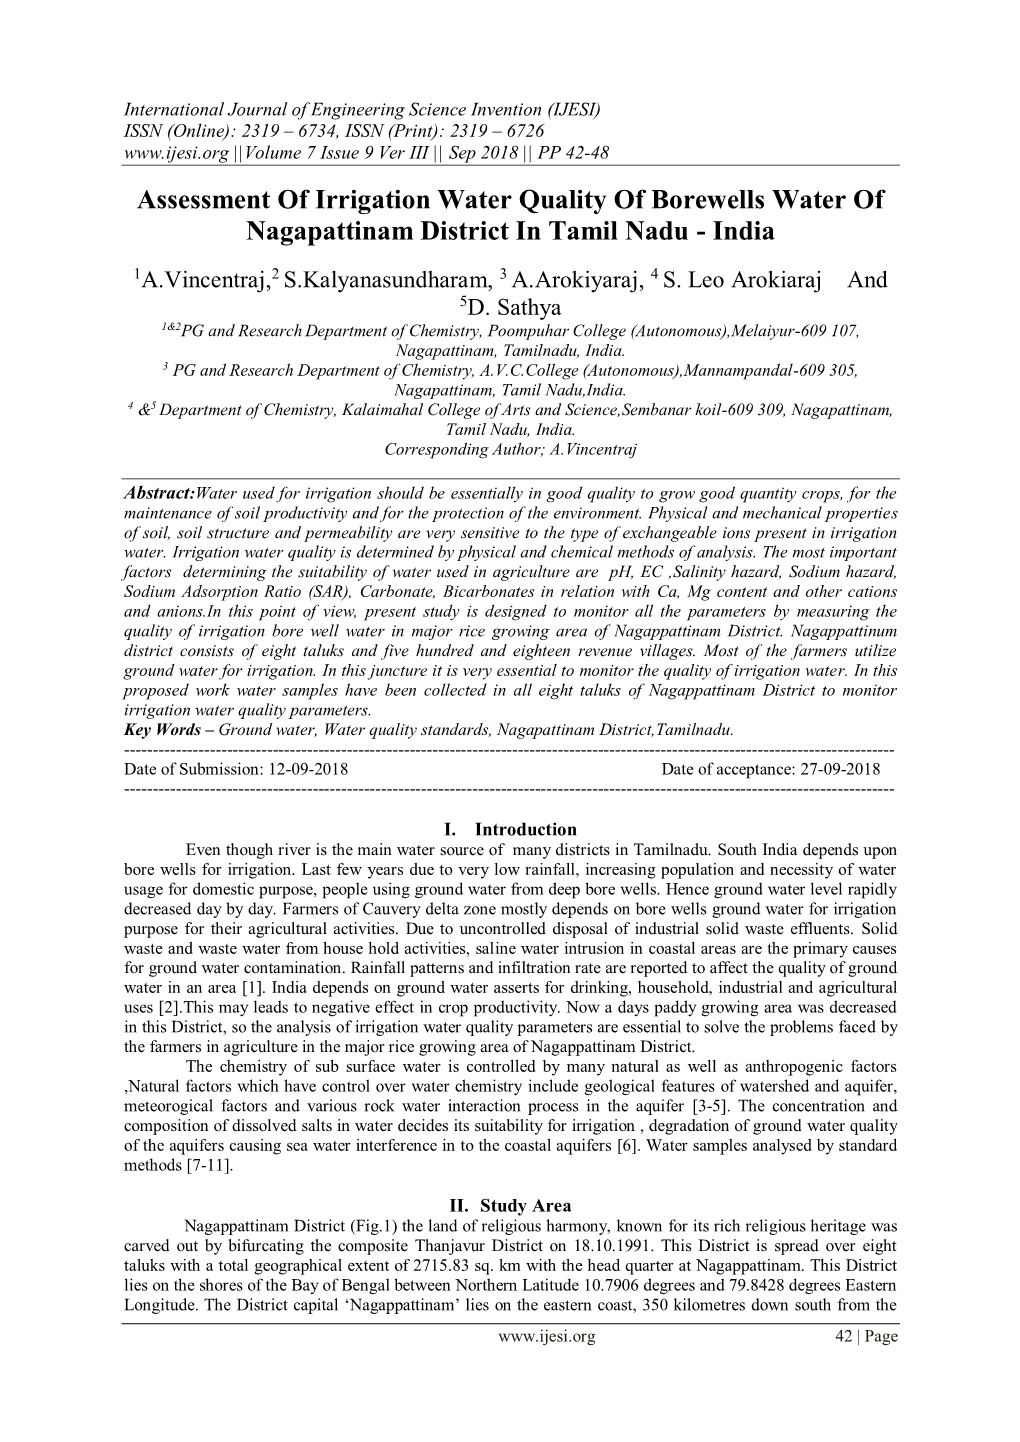 Assessment of Irrigation Water Quality of Borewells Water of Nagapattinam District in Tamil Nadu - India